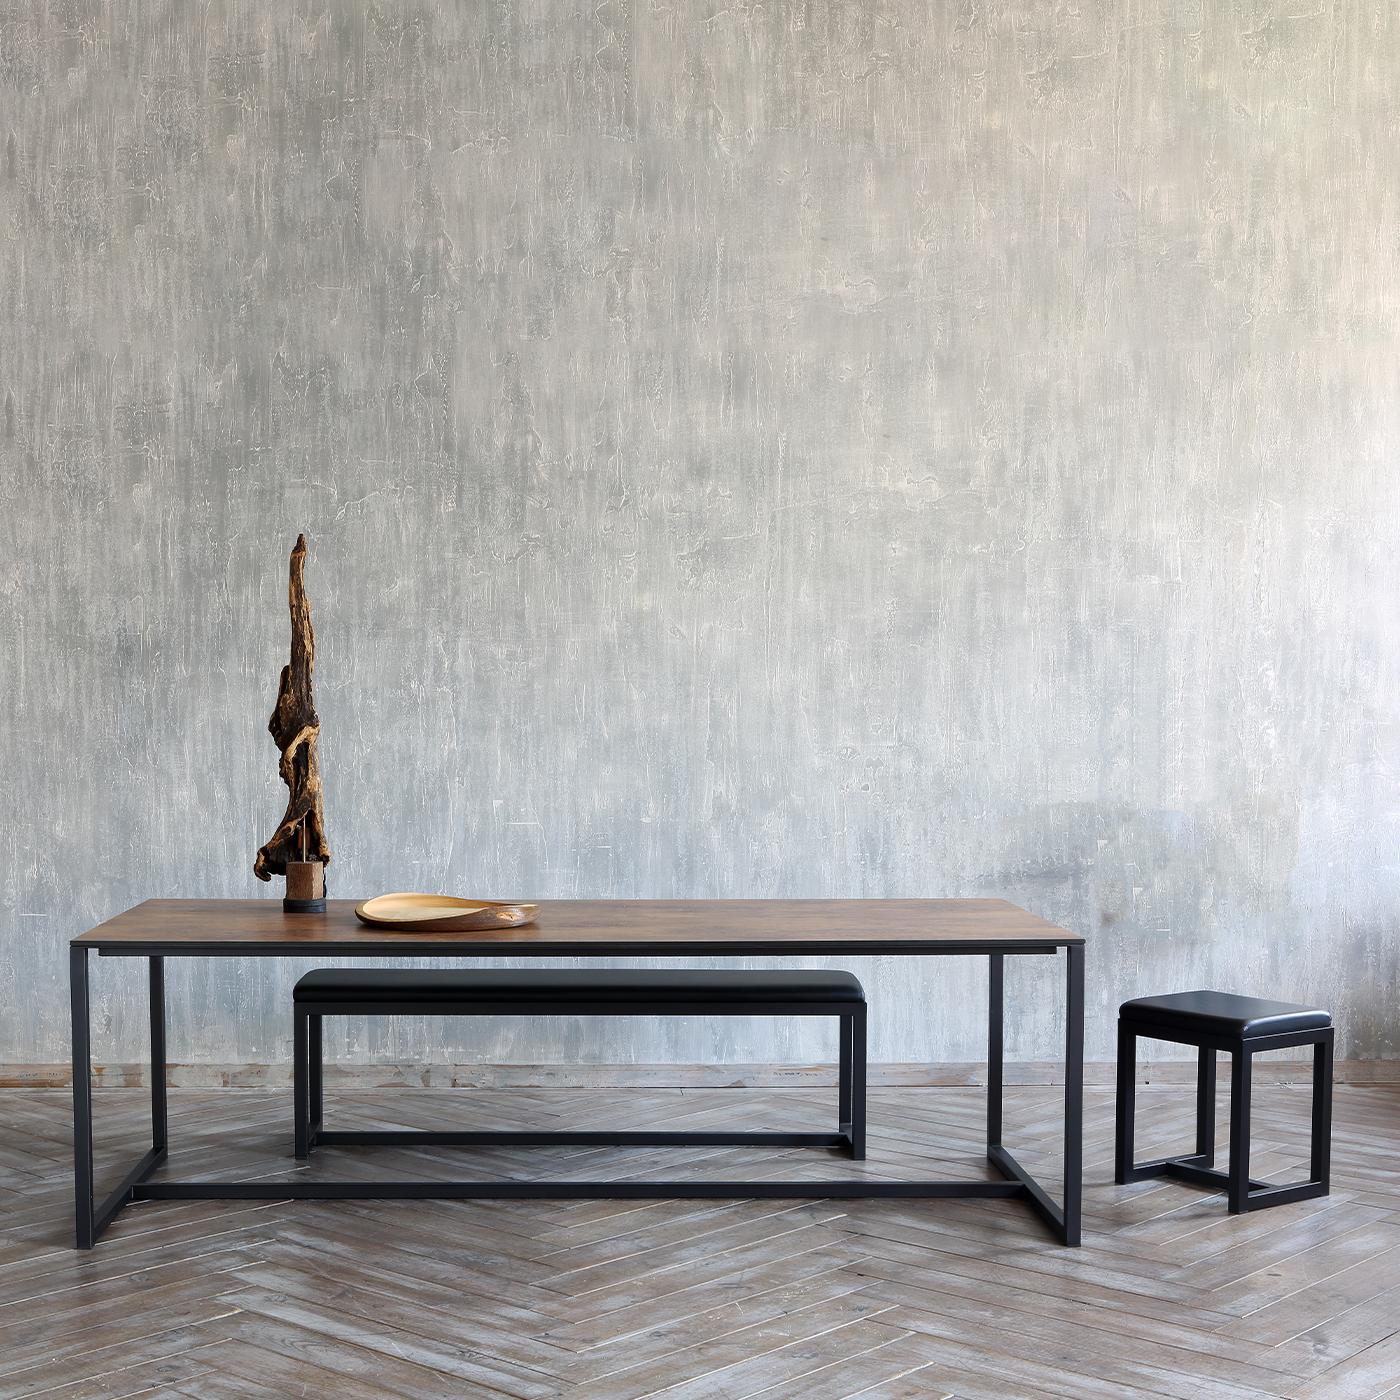 Elegant simplicity meets utmost comfort in this linear bench by Maurizio Peregalli. Joined by a structural line at the base, the sleigh copper structure boasts a refined sandblasted black finish - also available in an embossed white version on